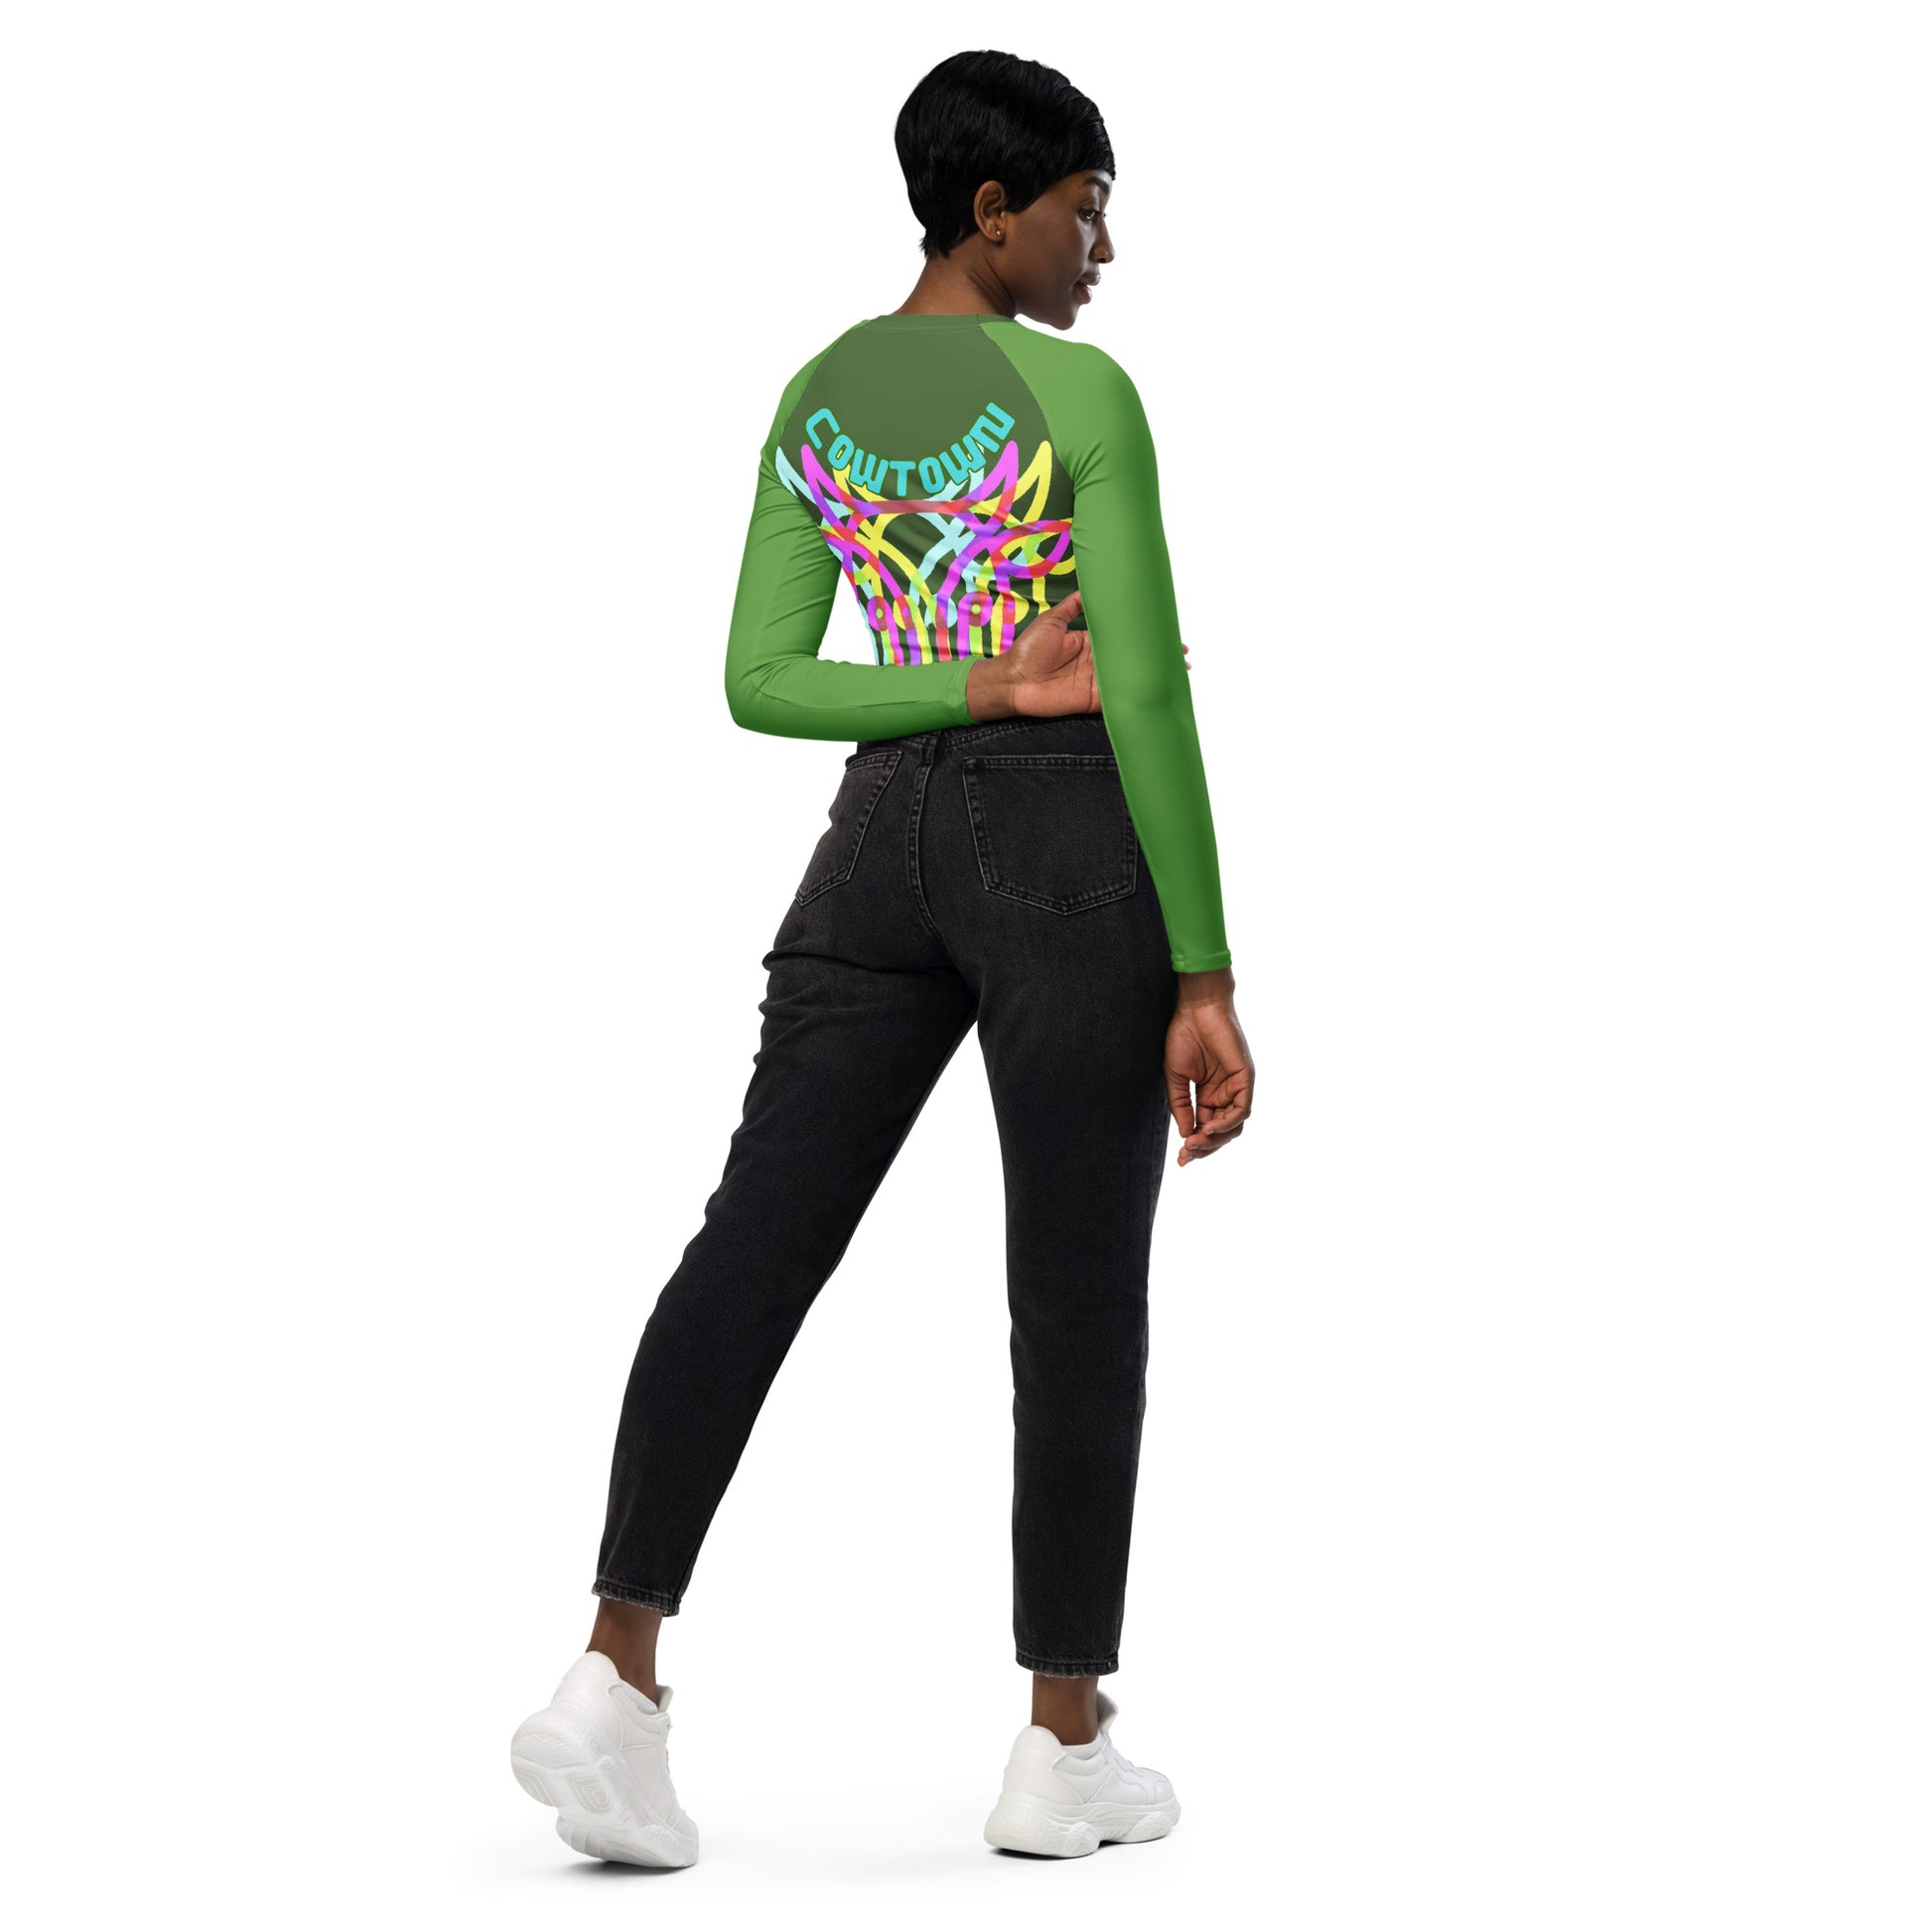 BRIXHAM BM Cowtown Recycled long-sleeve crop top duo green back with cowtown design